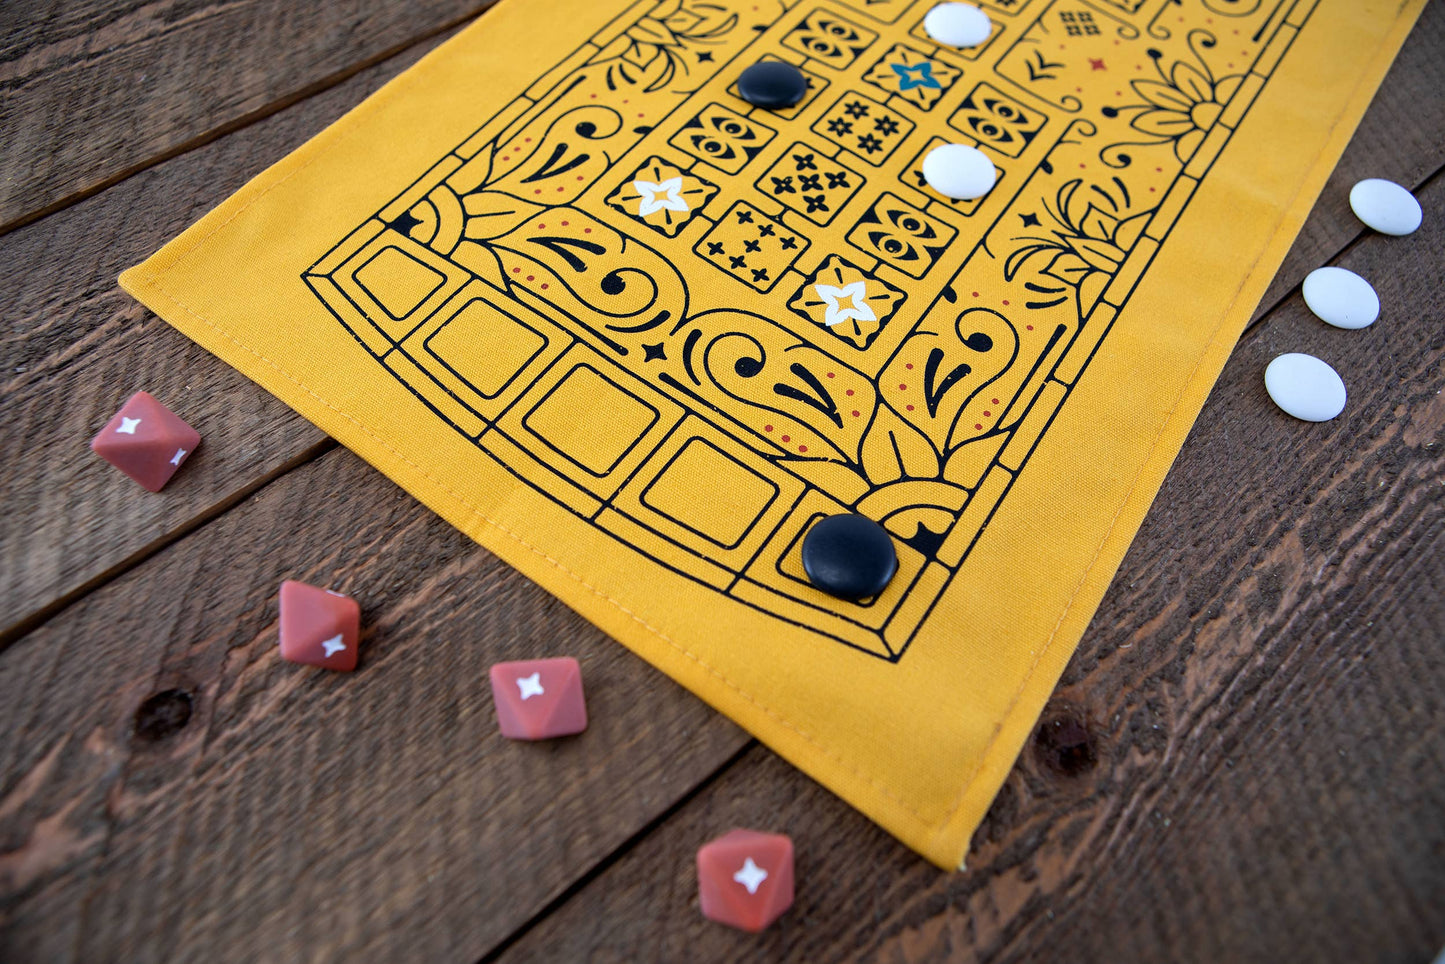 The Royal Game of UR - One of the Oldest Games in the World